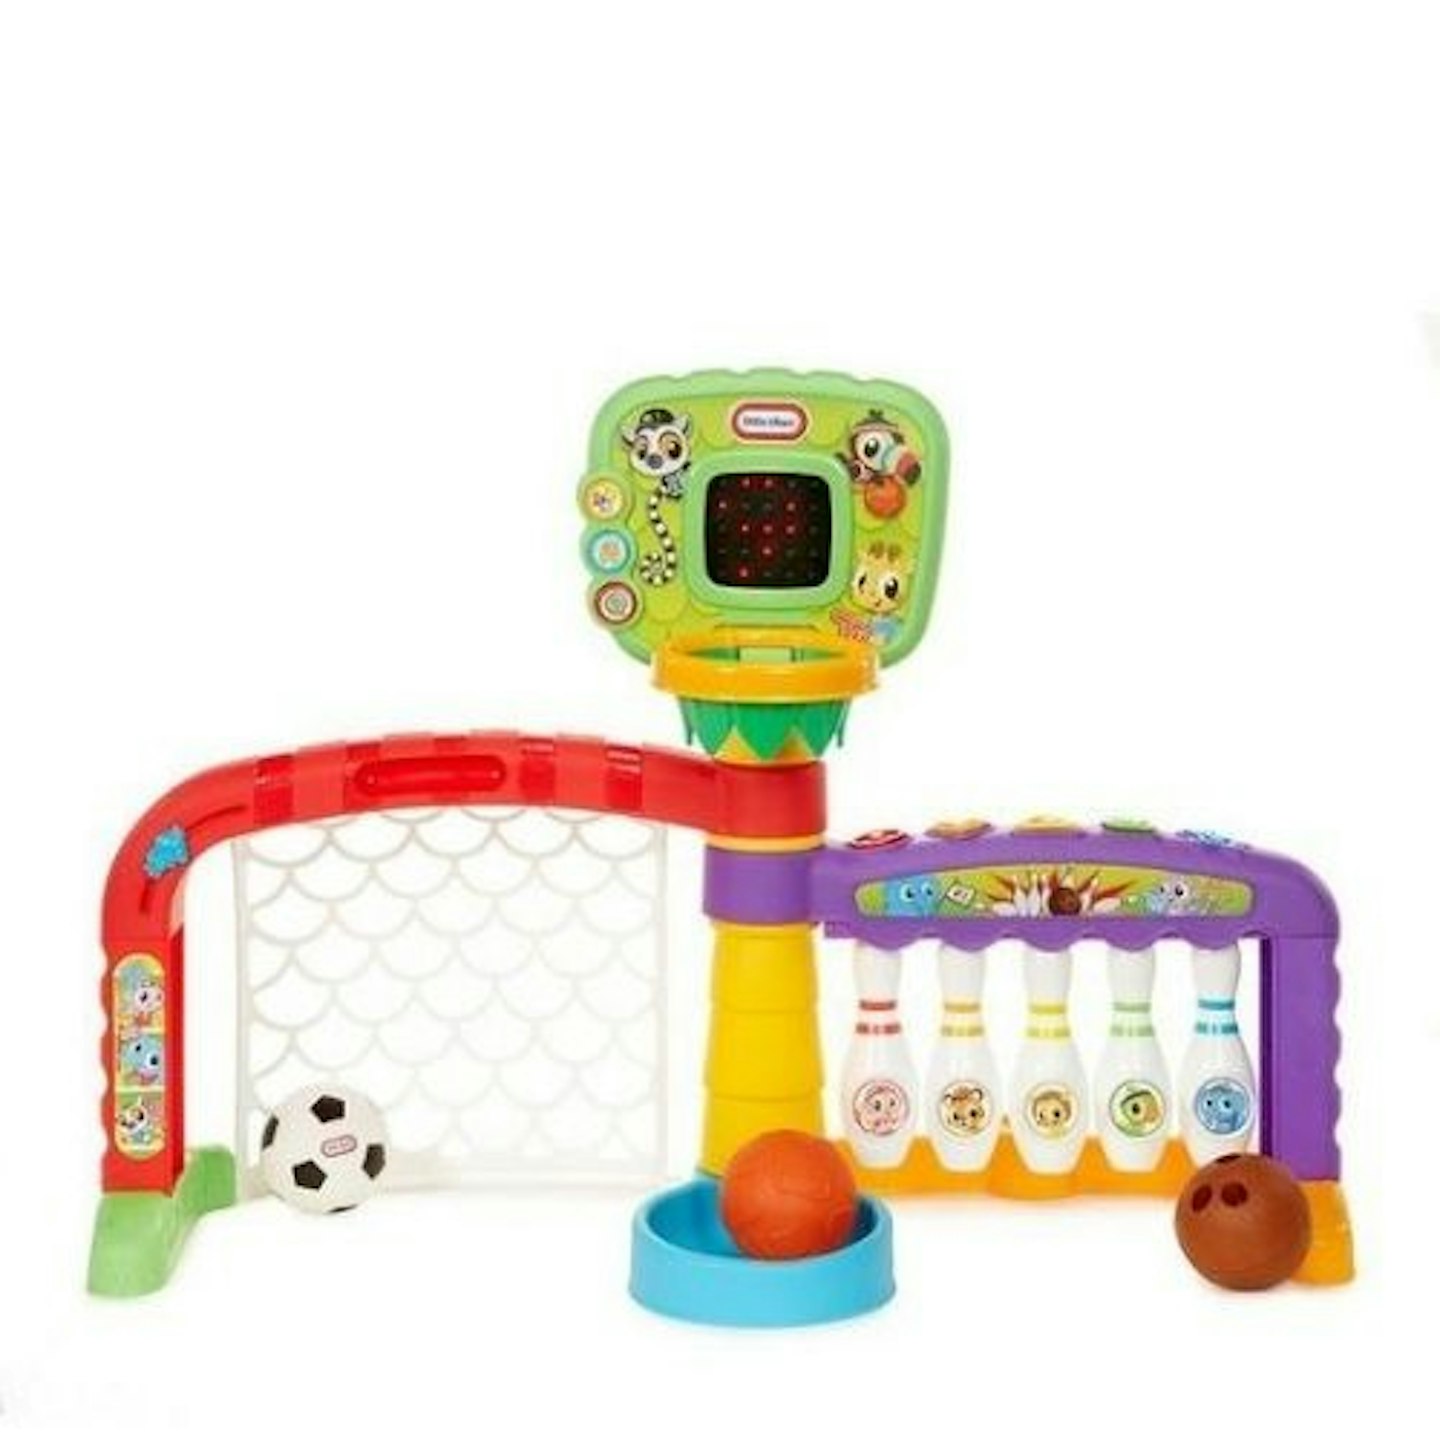 Top Christmas Toys: 3-in-1 Sports Zone